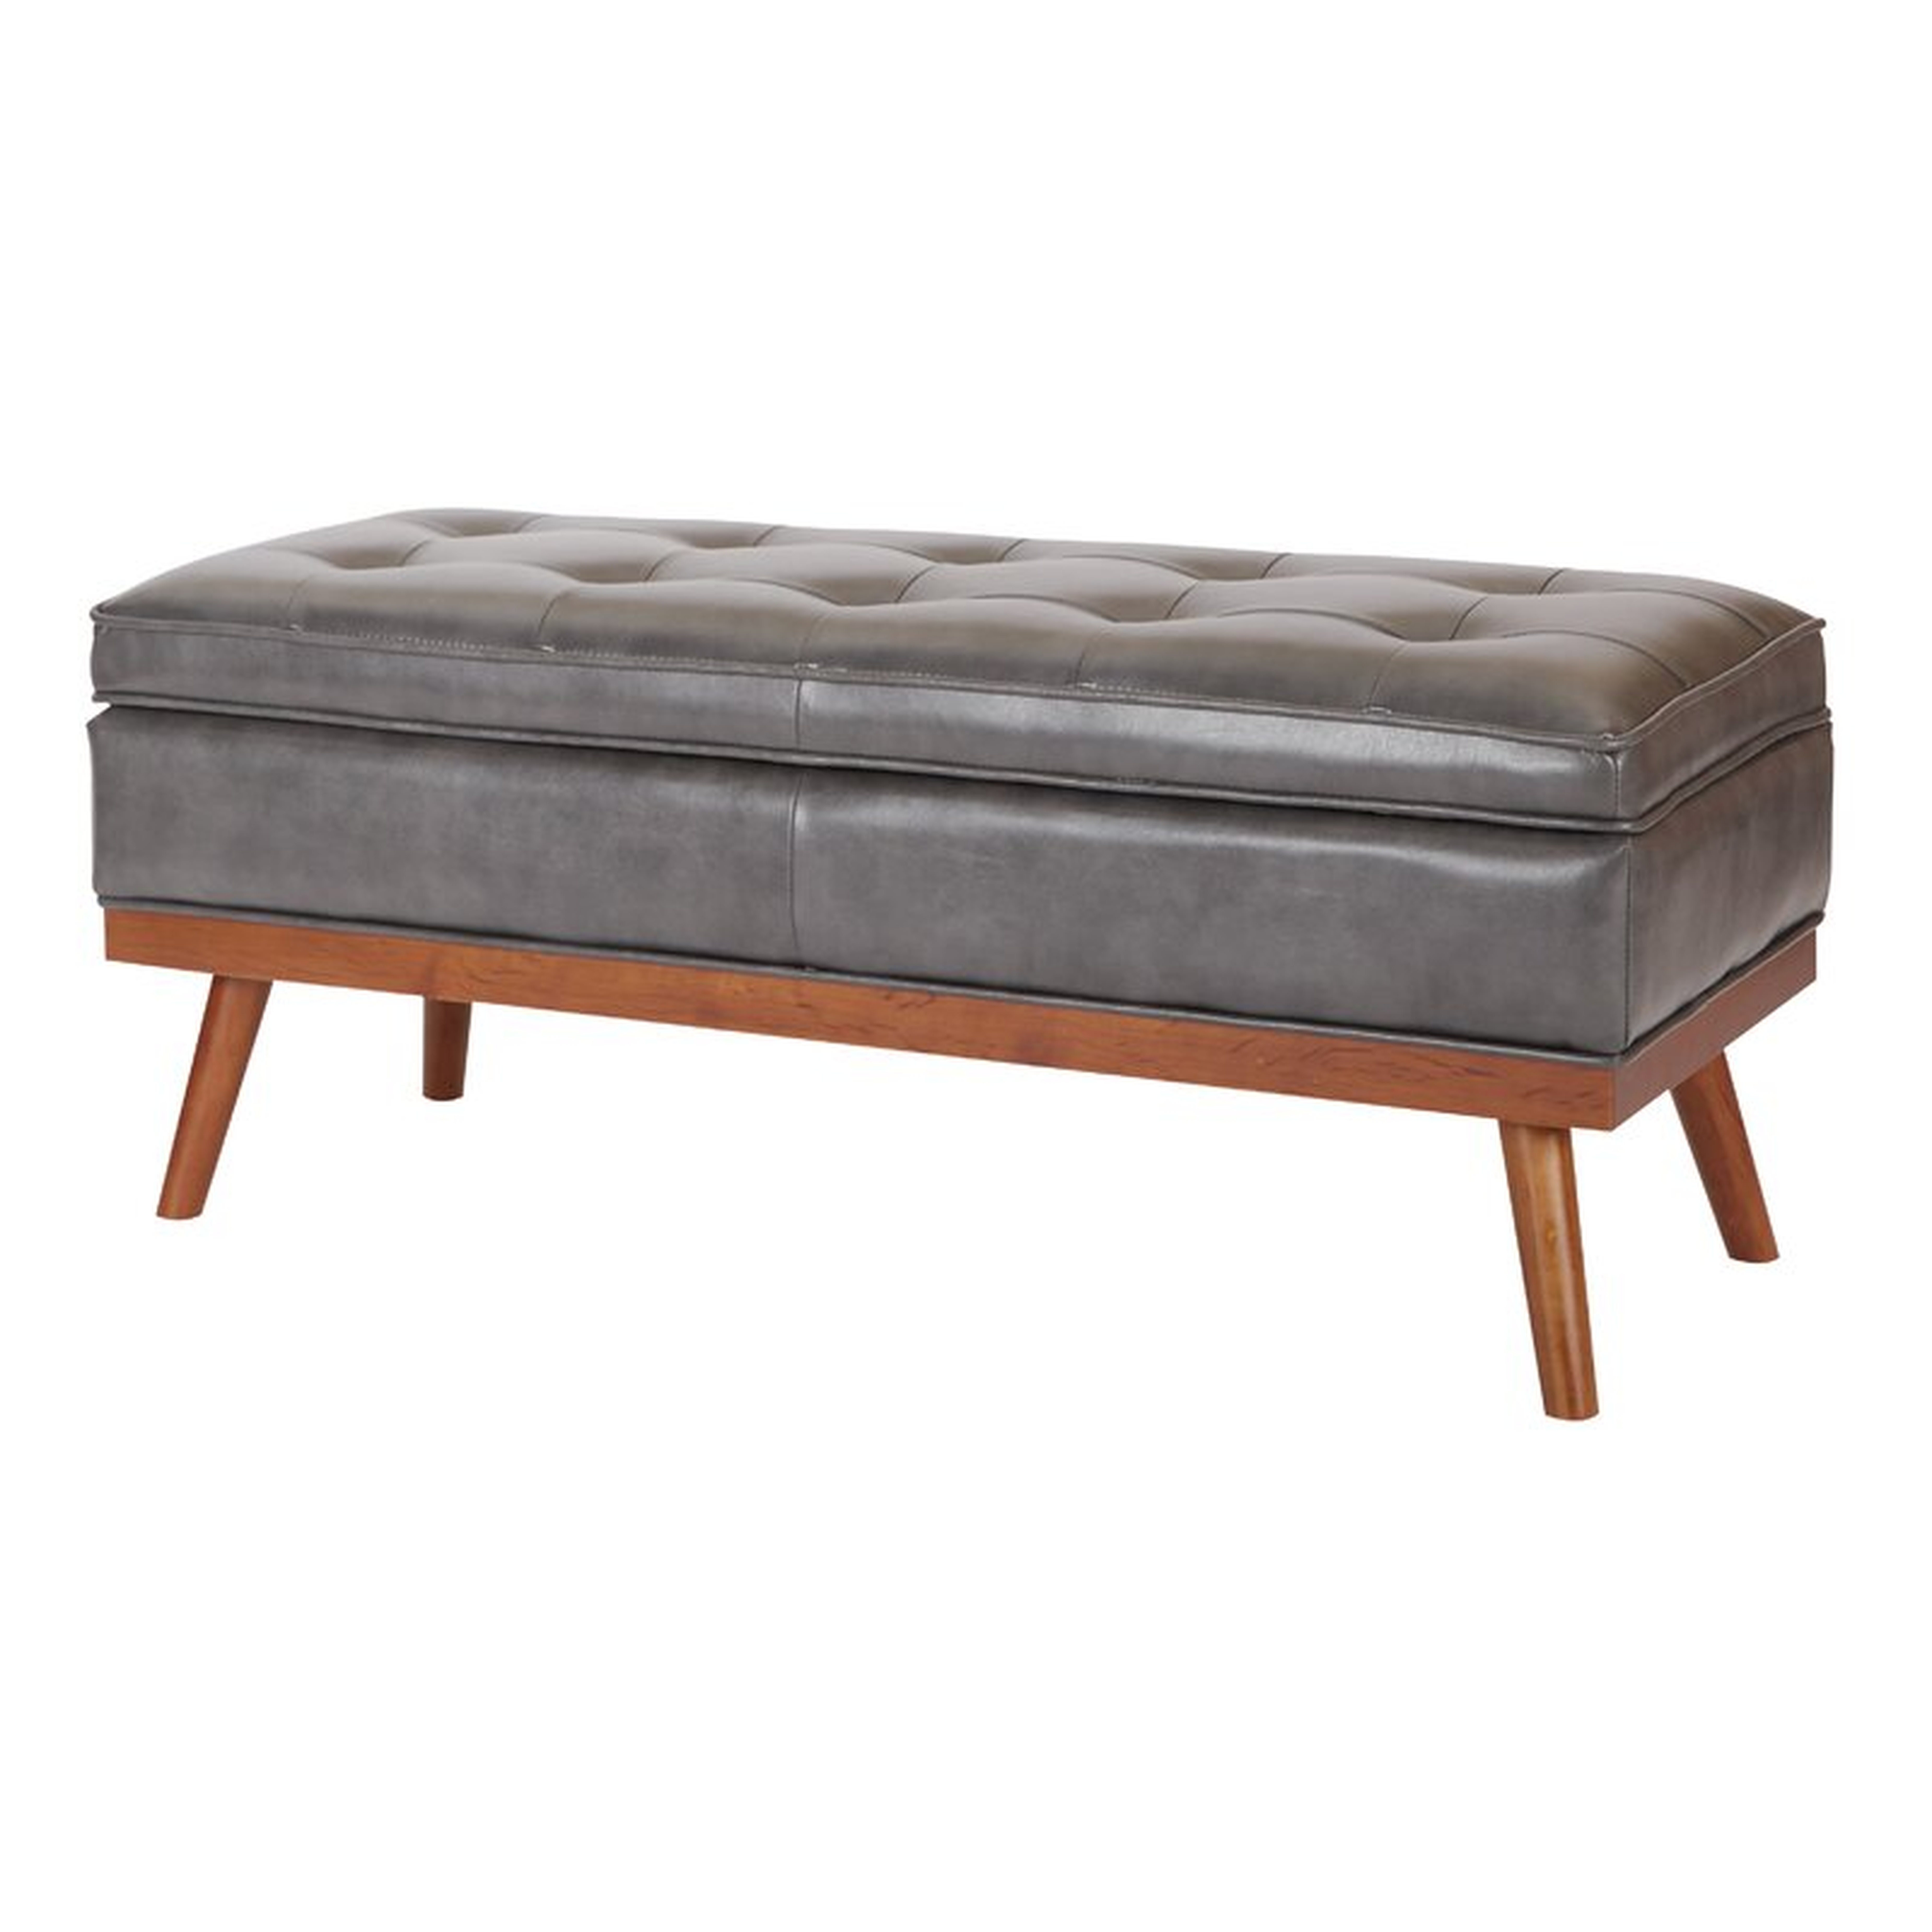 Ronquillo Faux Leather Storage Bench - Wayfair